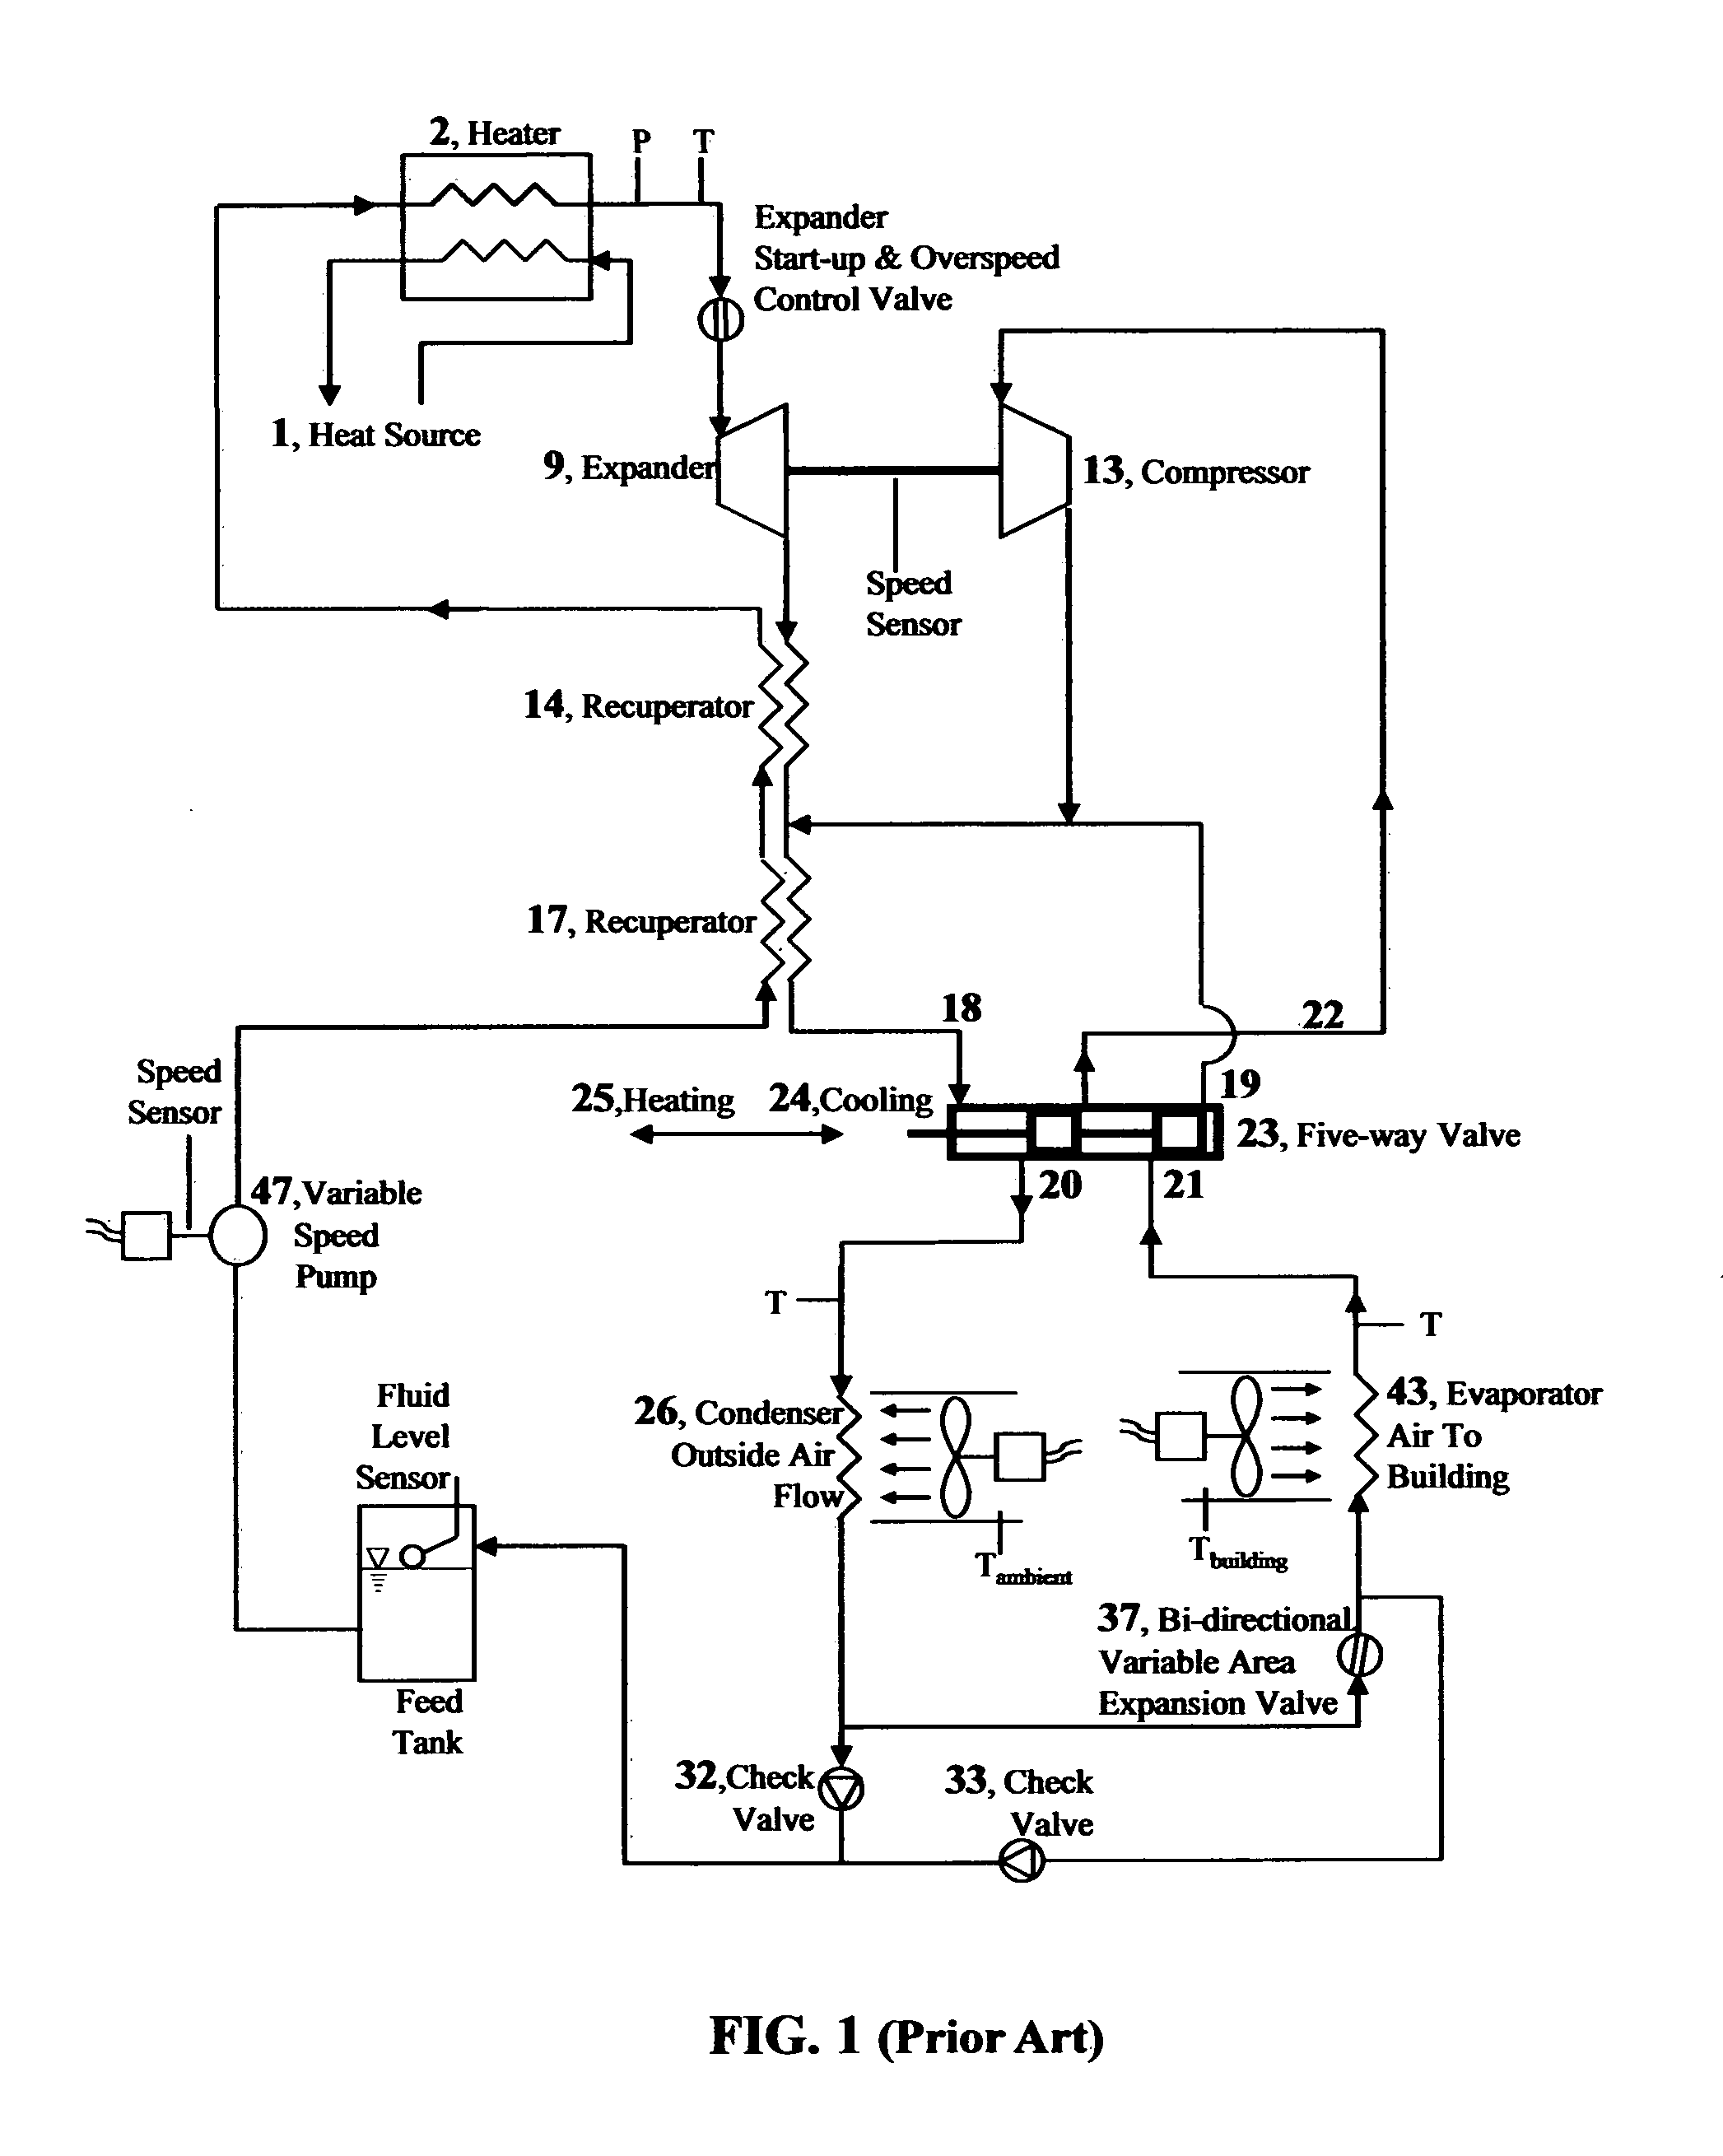 Integrated power, cooling, and heating apparatus utilizing waste heat recovery